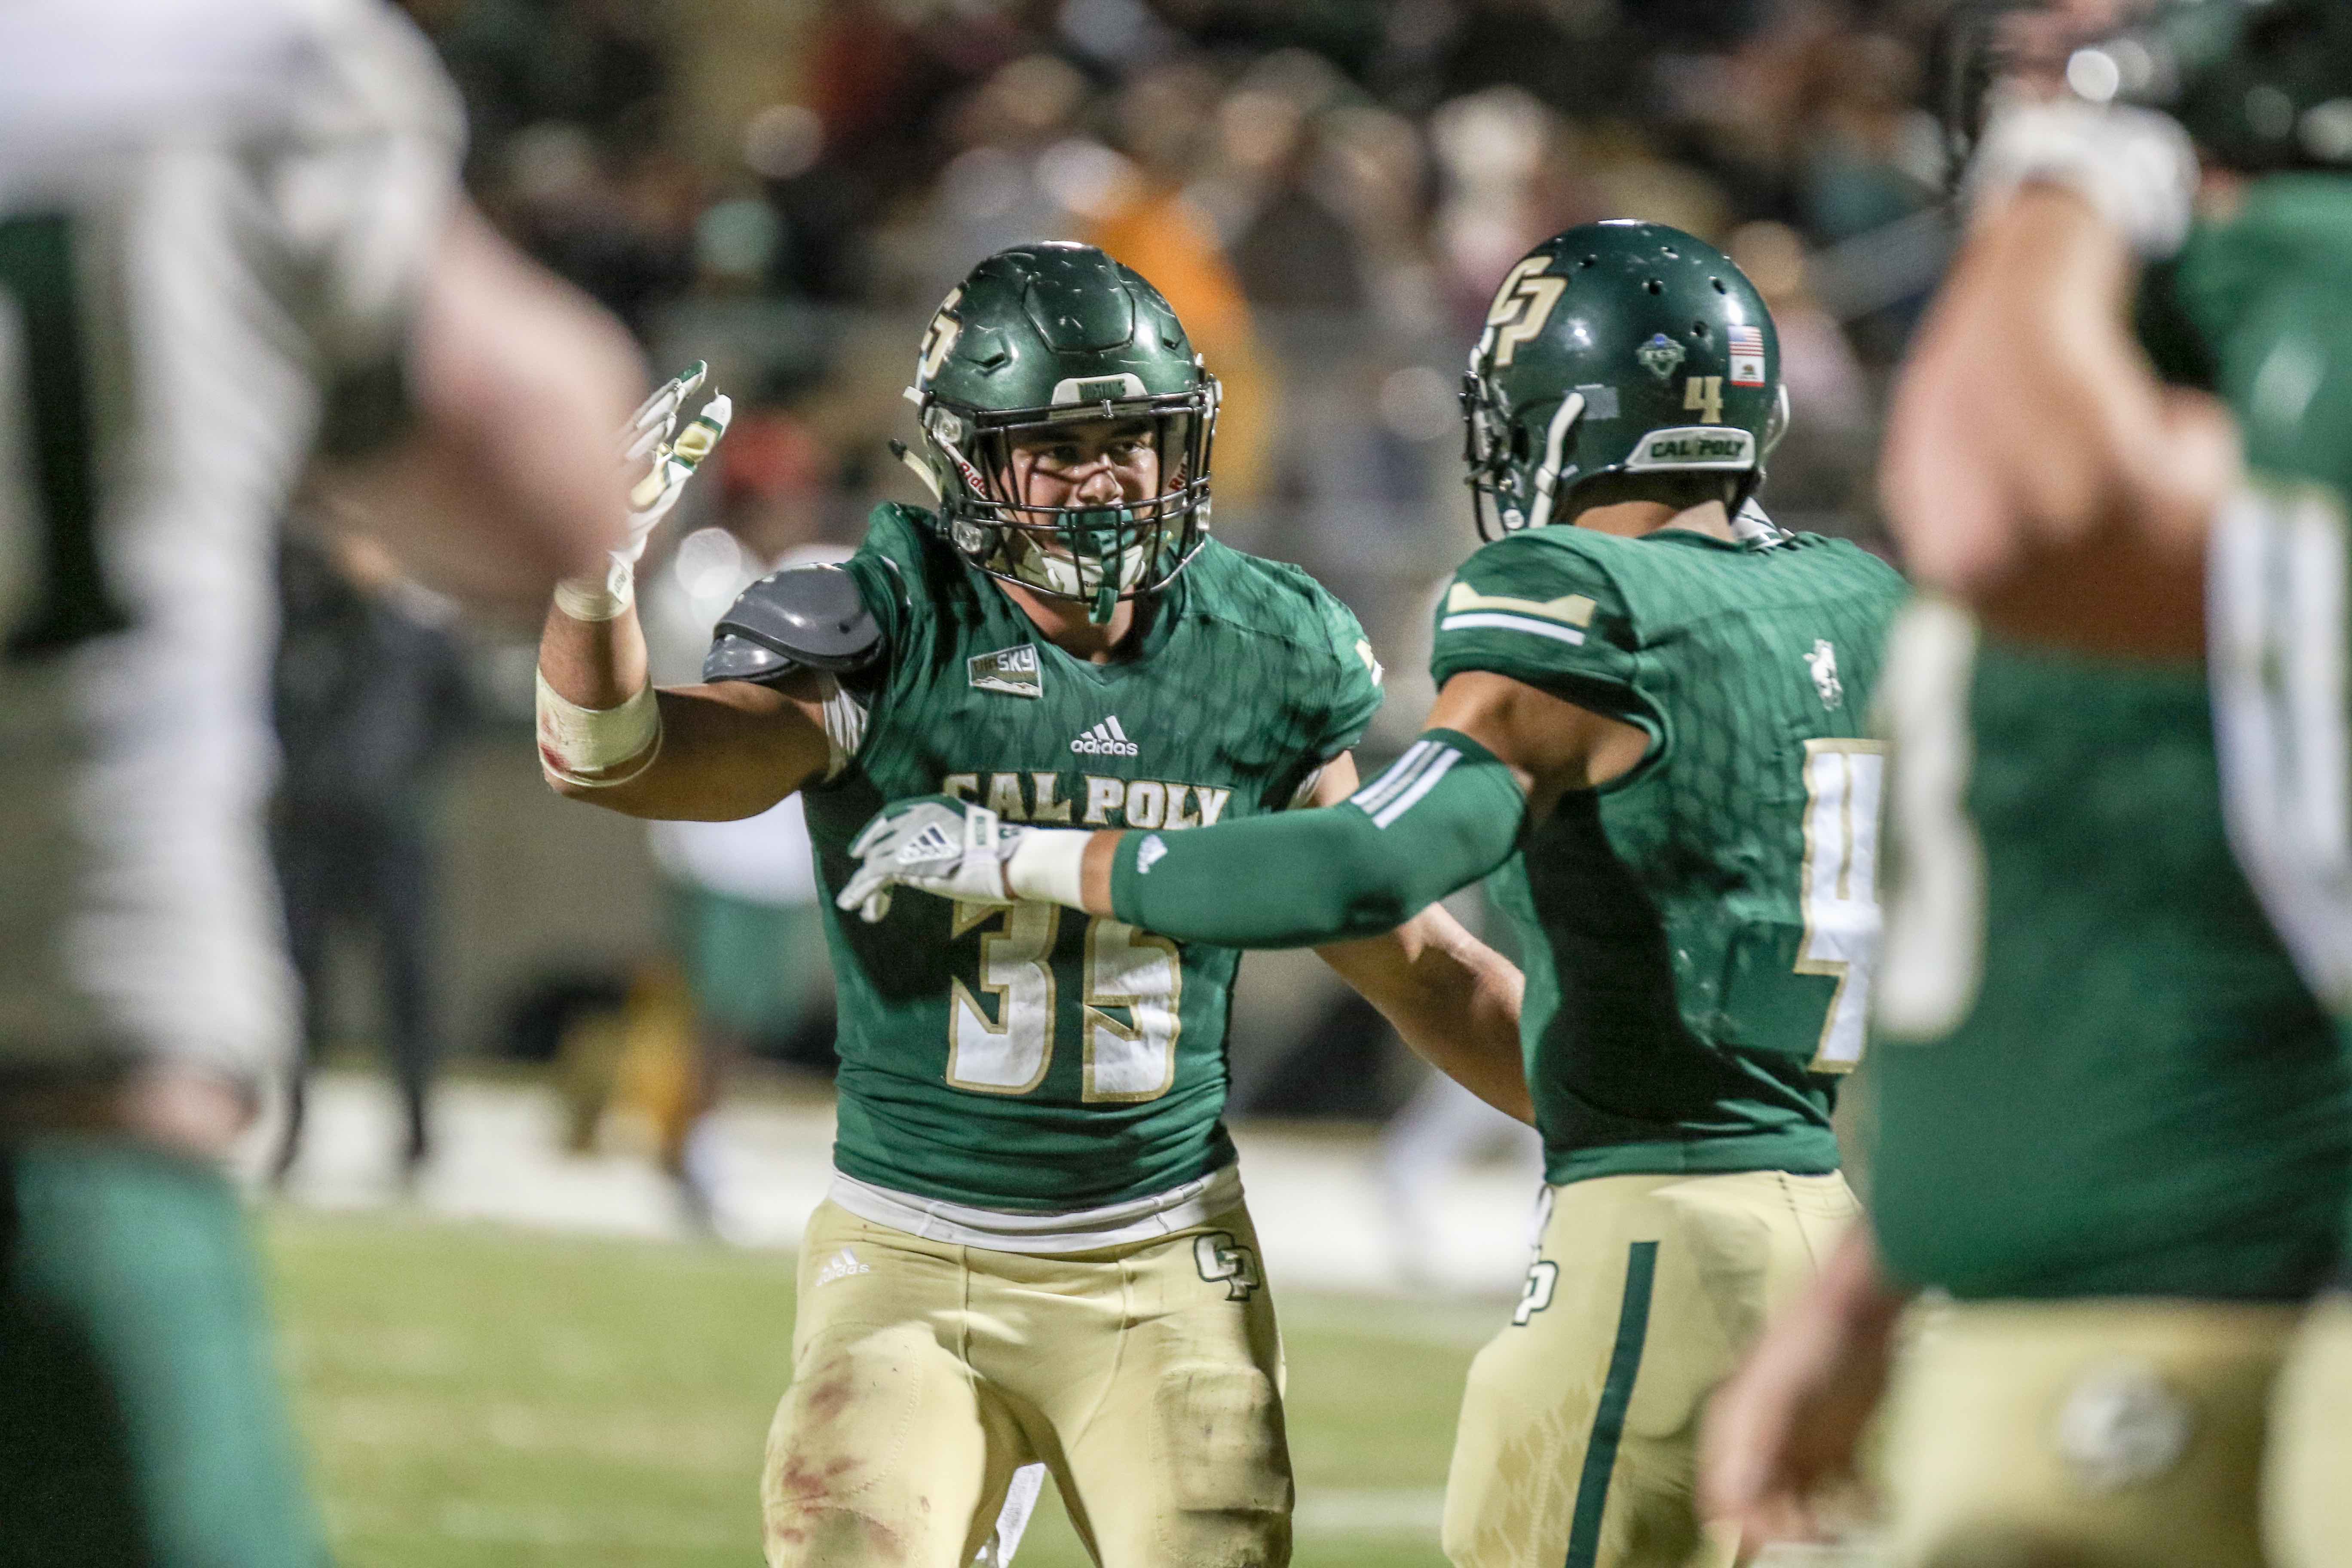 Cal Poly Football Earns First Win on Weekend Fansmanship